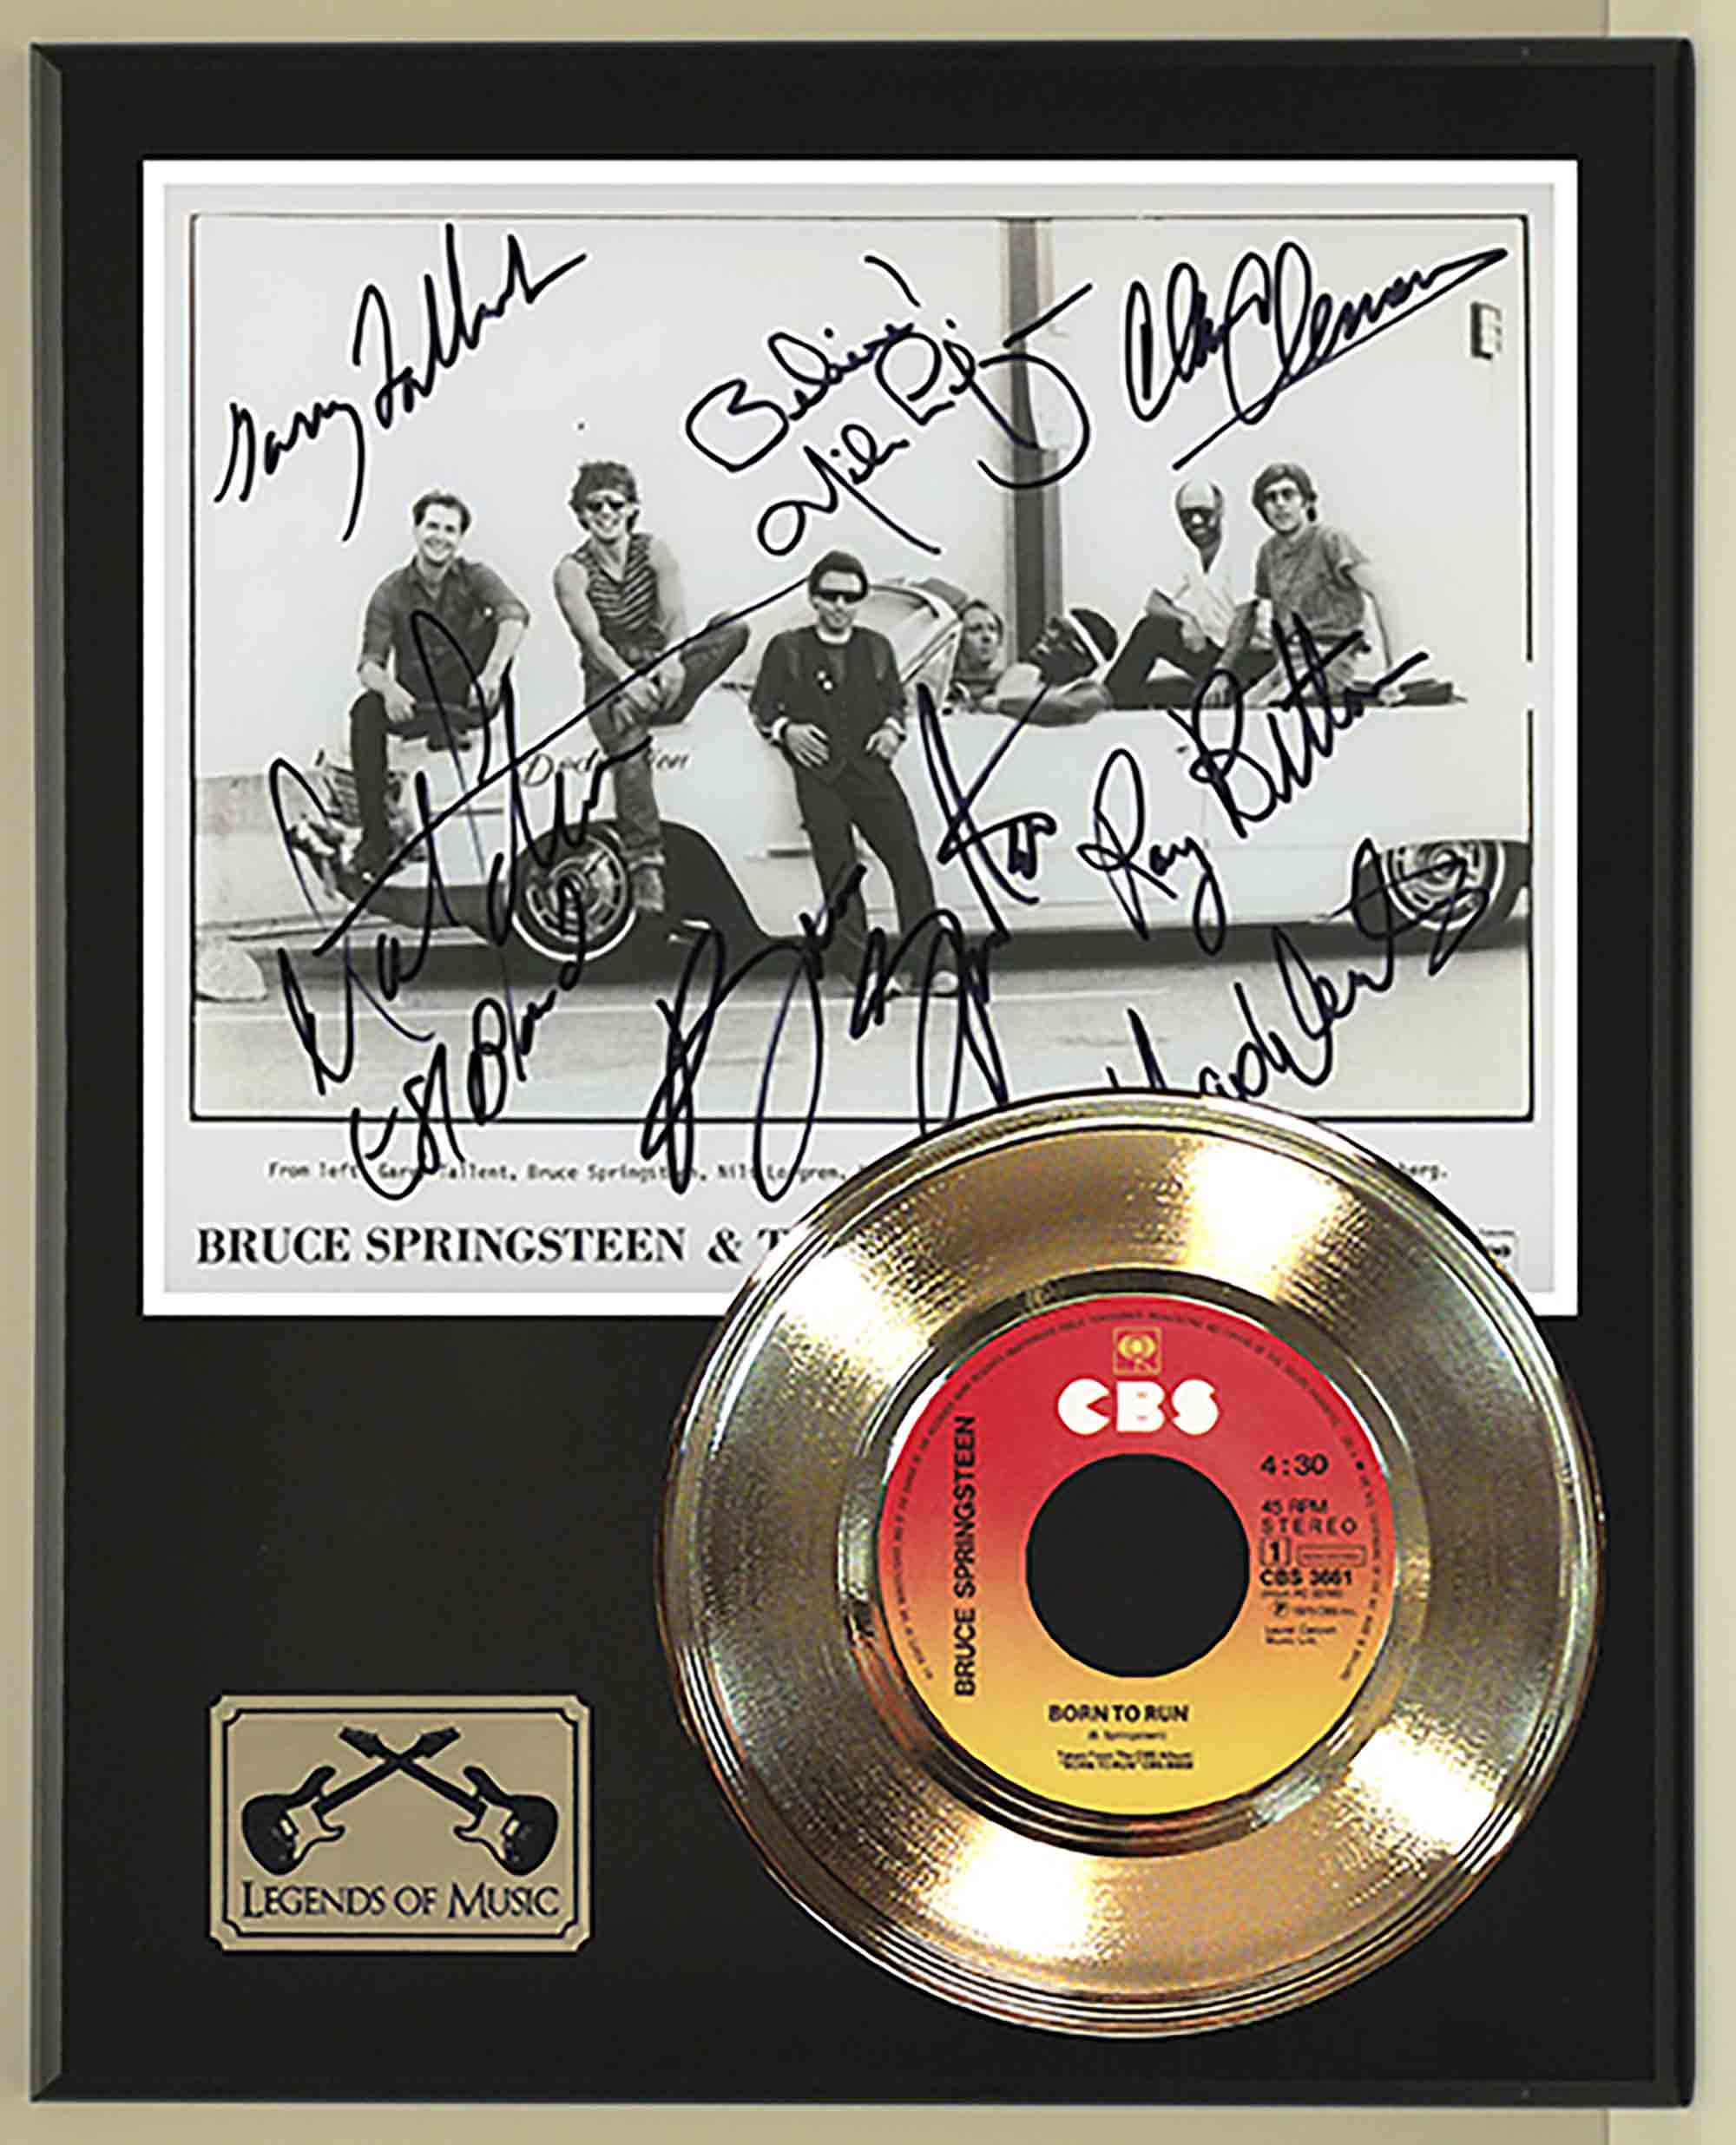 Bruce Springsteen - Born To Run Reproduction Signed Gold 45 Record Ltd Edition Award Quality - Gold Record Album and Disc Collectible Memorabilia